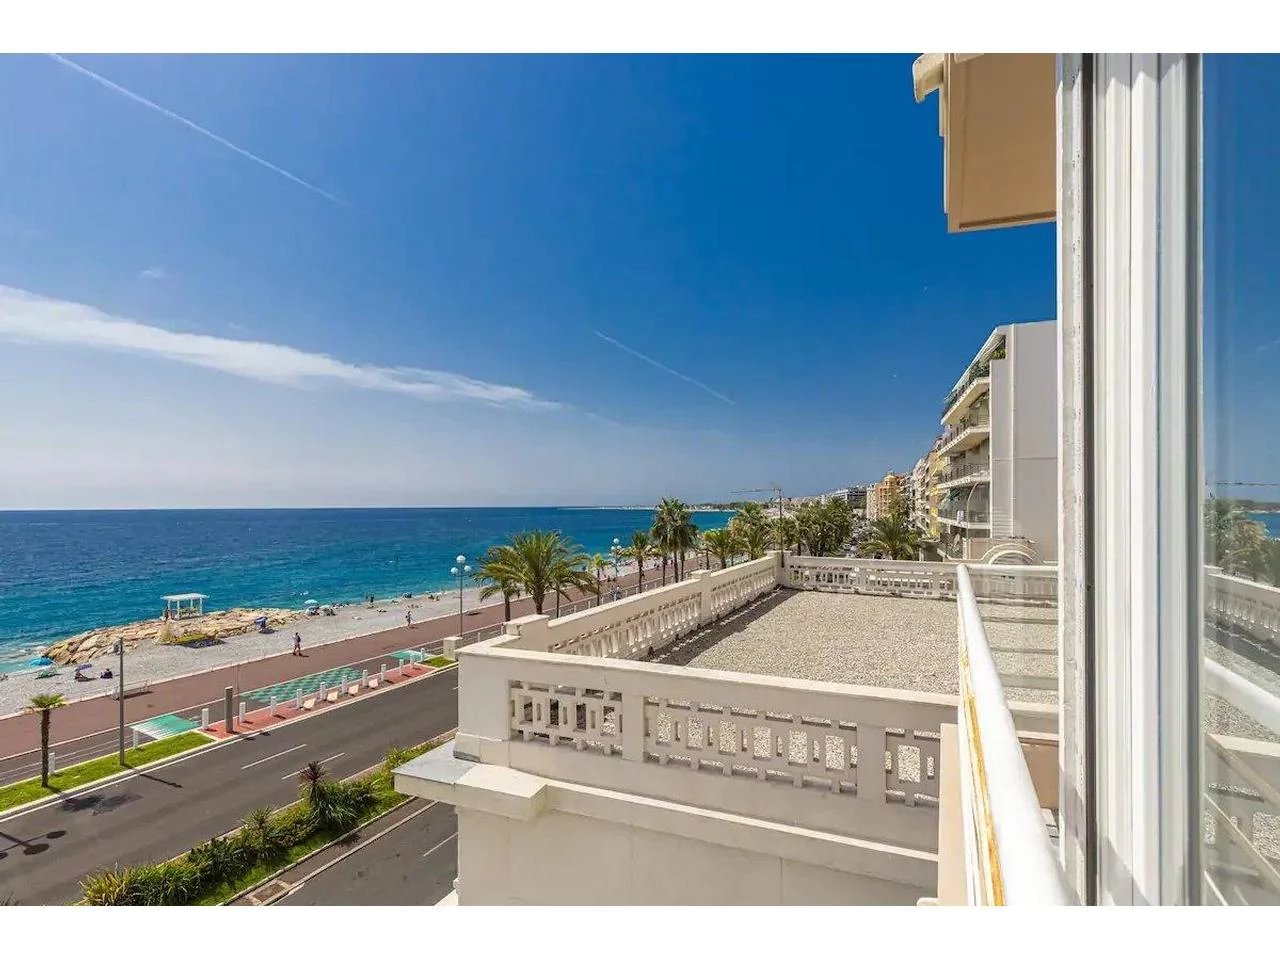 Appartement  3 Rooms 53m2  for sale   599 000 €